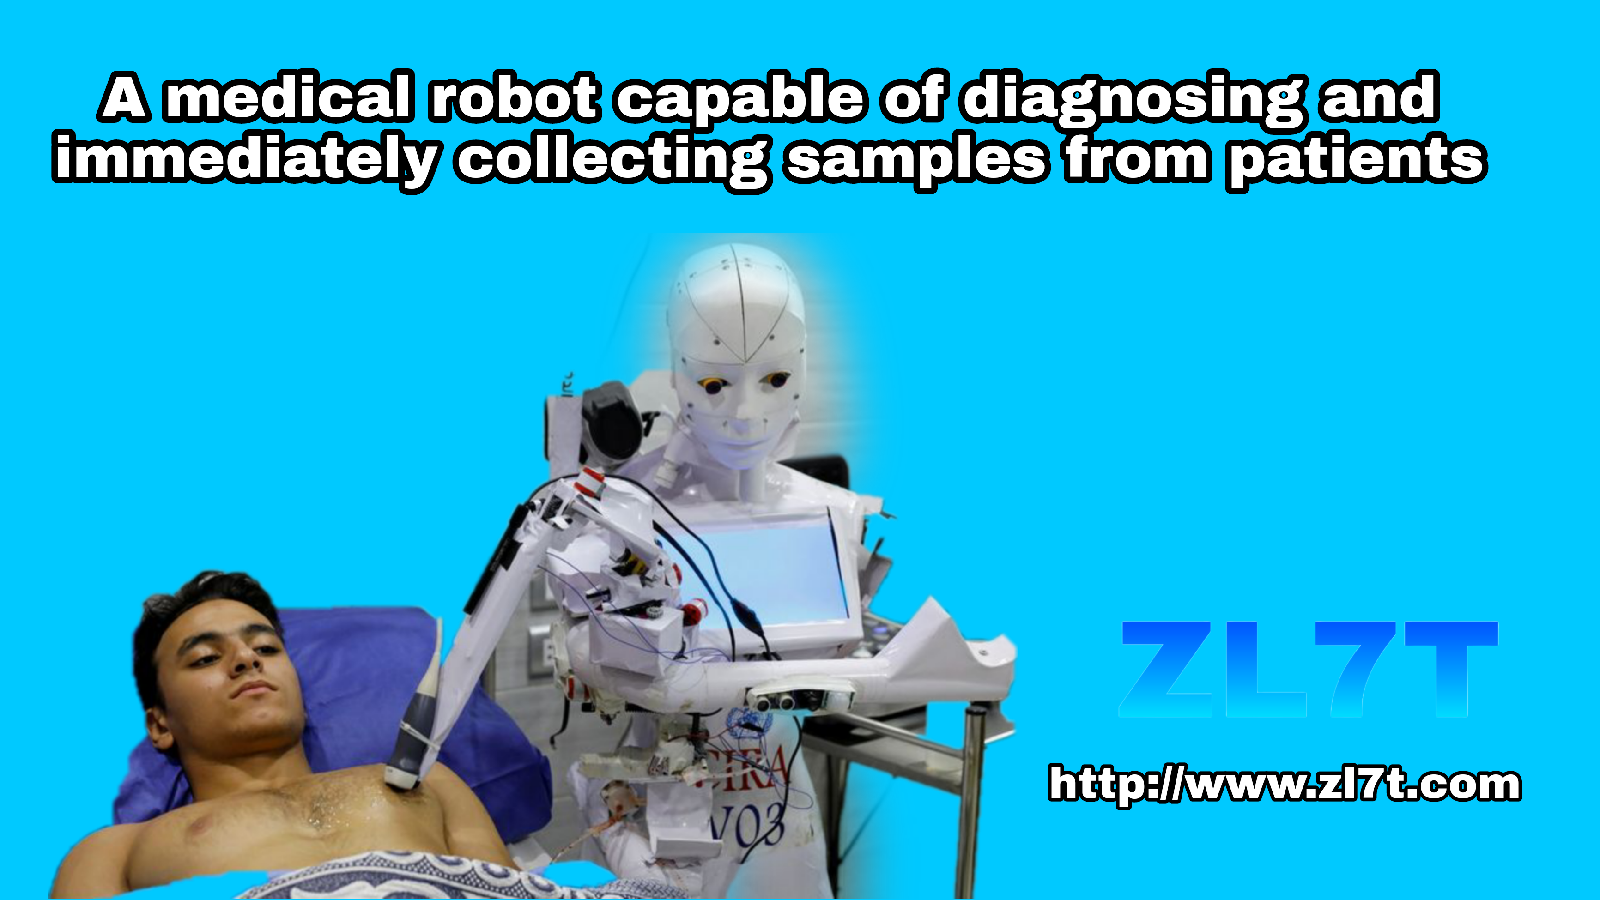 Medical robot capable of drawing samples from patients and testing them instantly